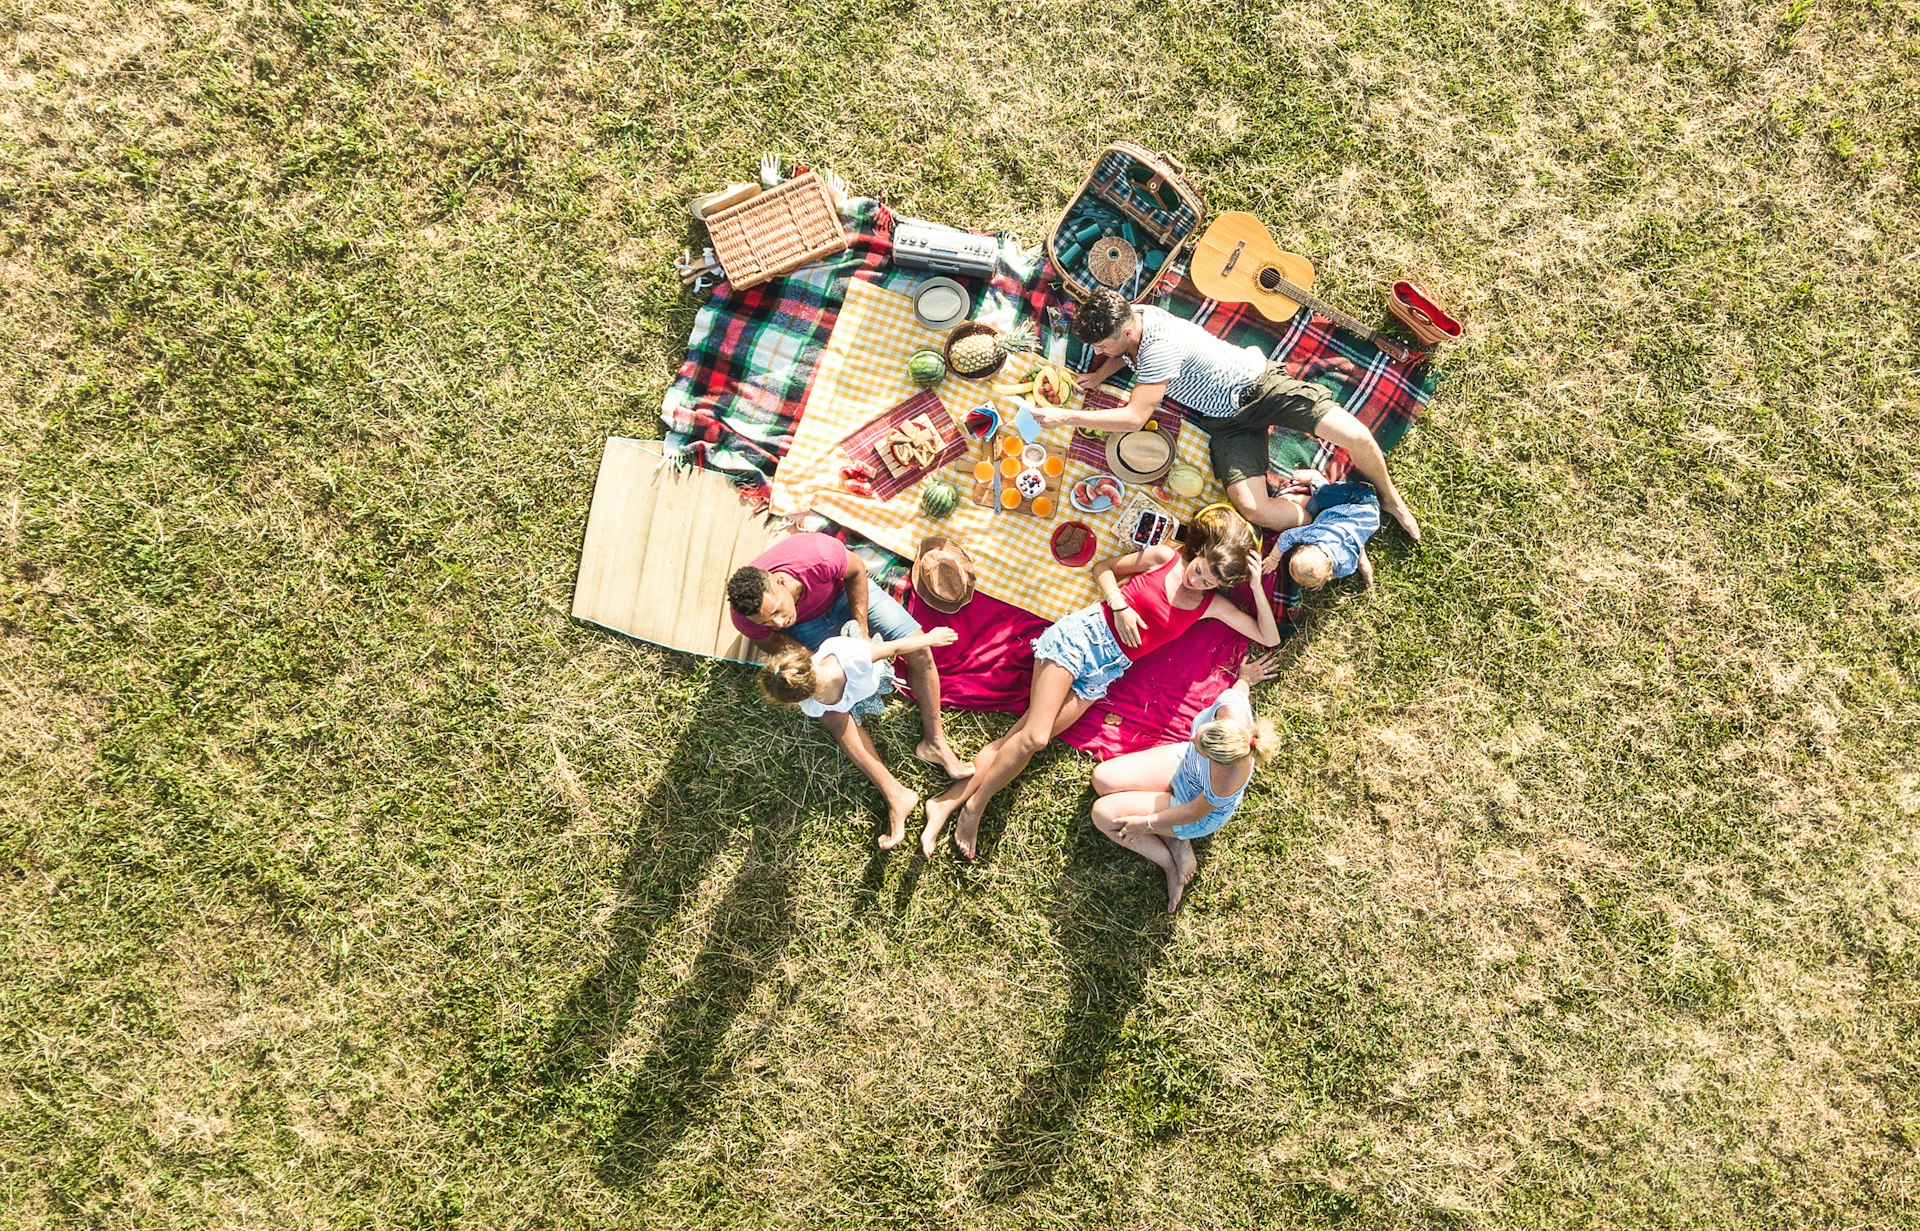 Aerial view of a picnic from a drone